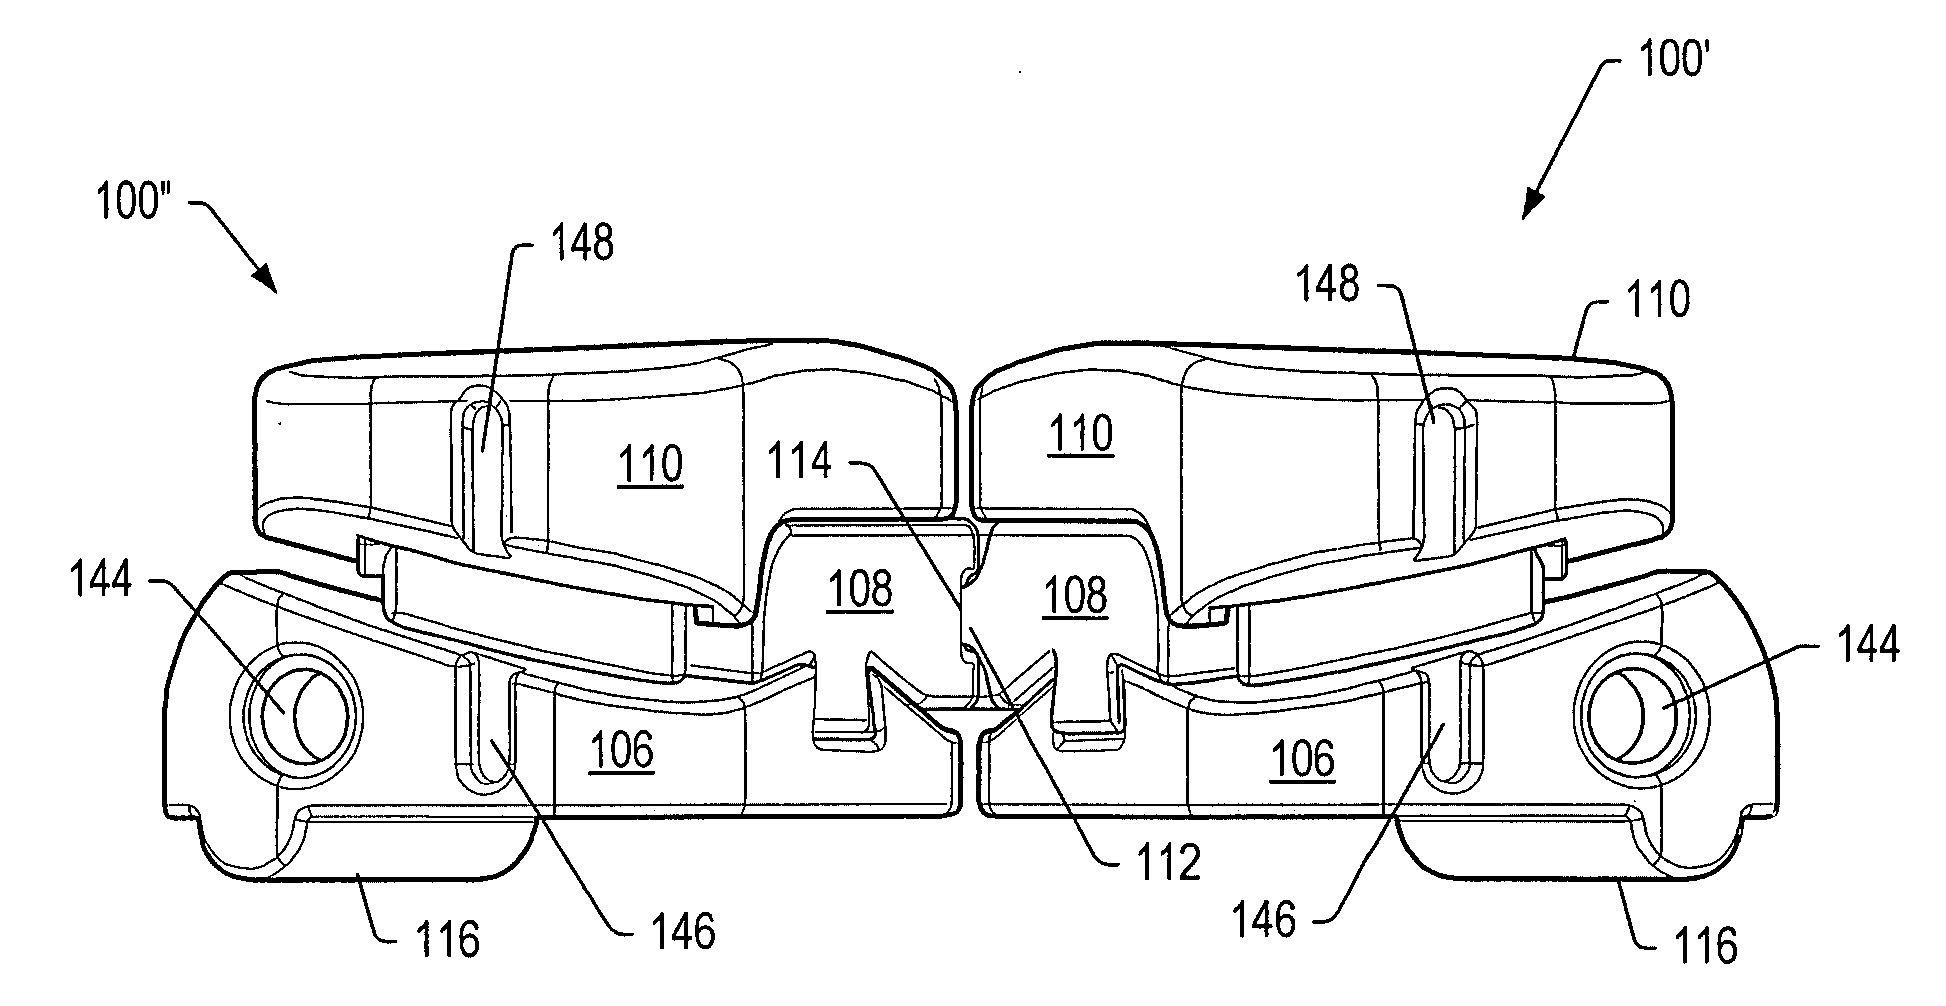 Posterior stabilization systems with shared, dual dampener systems